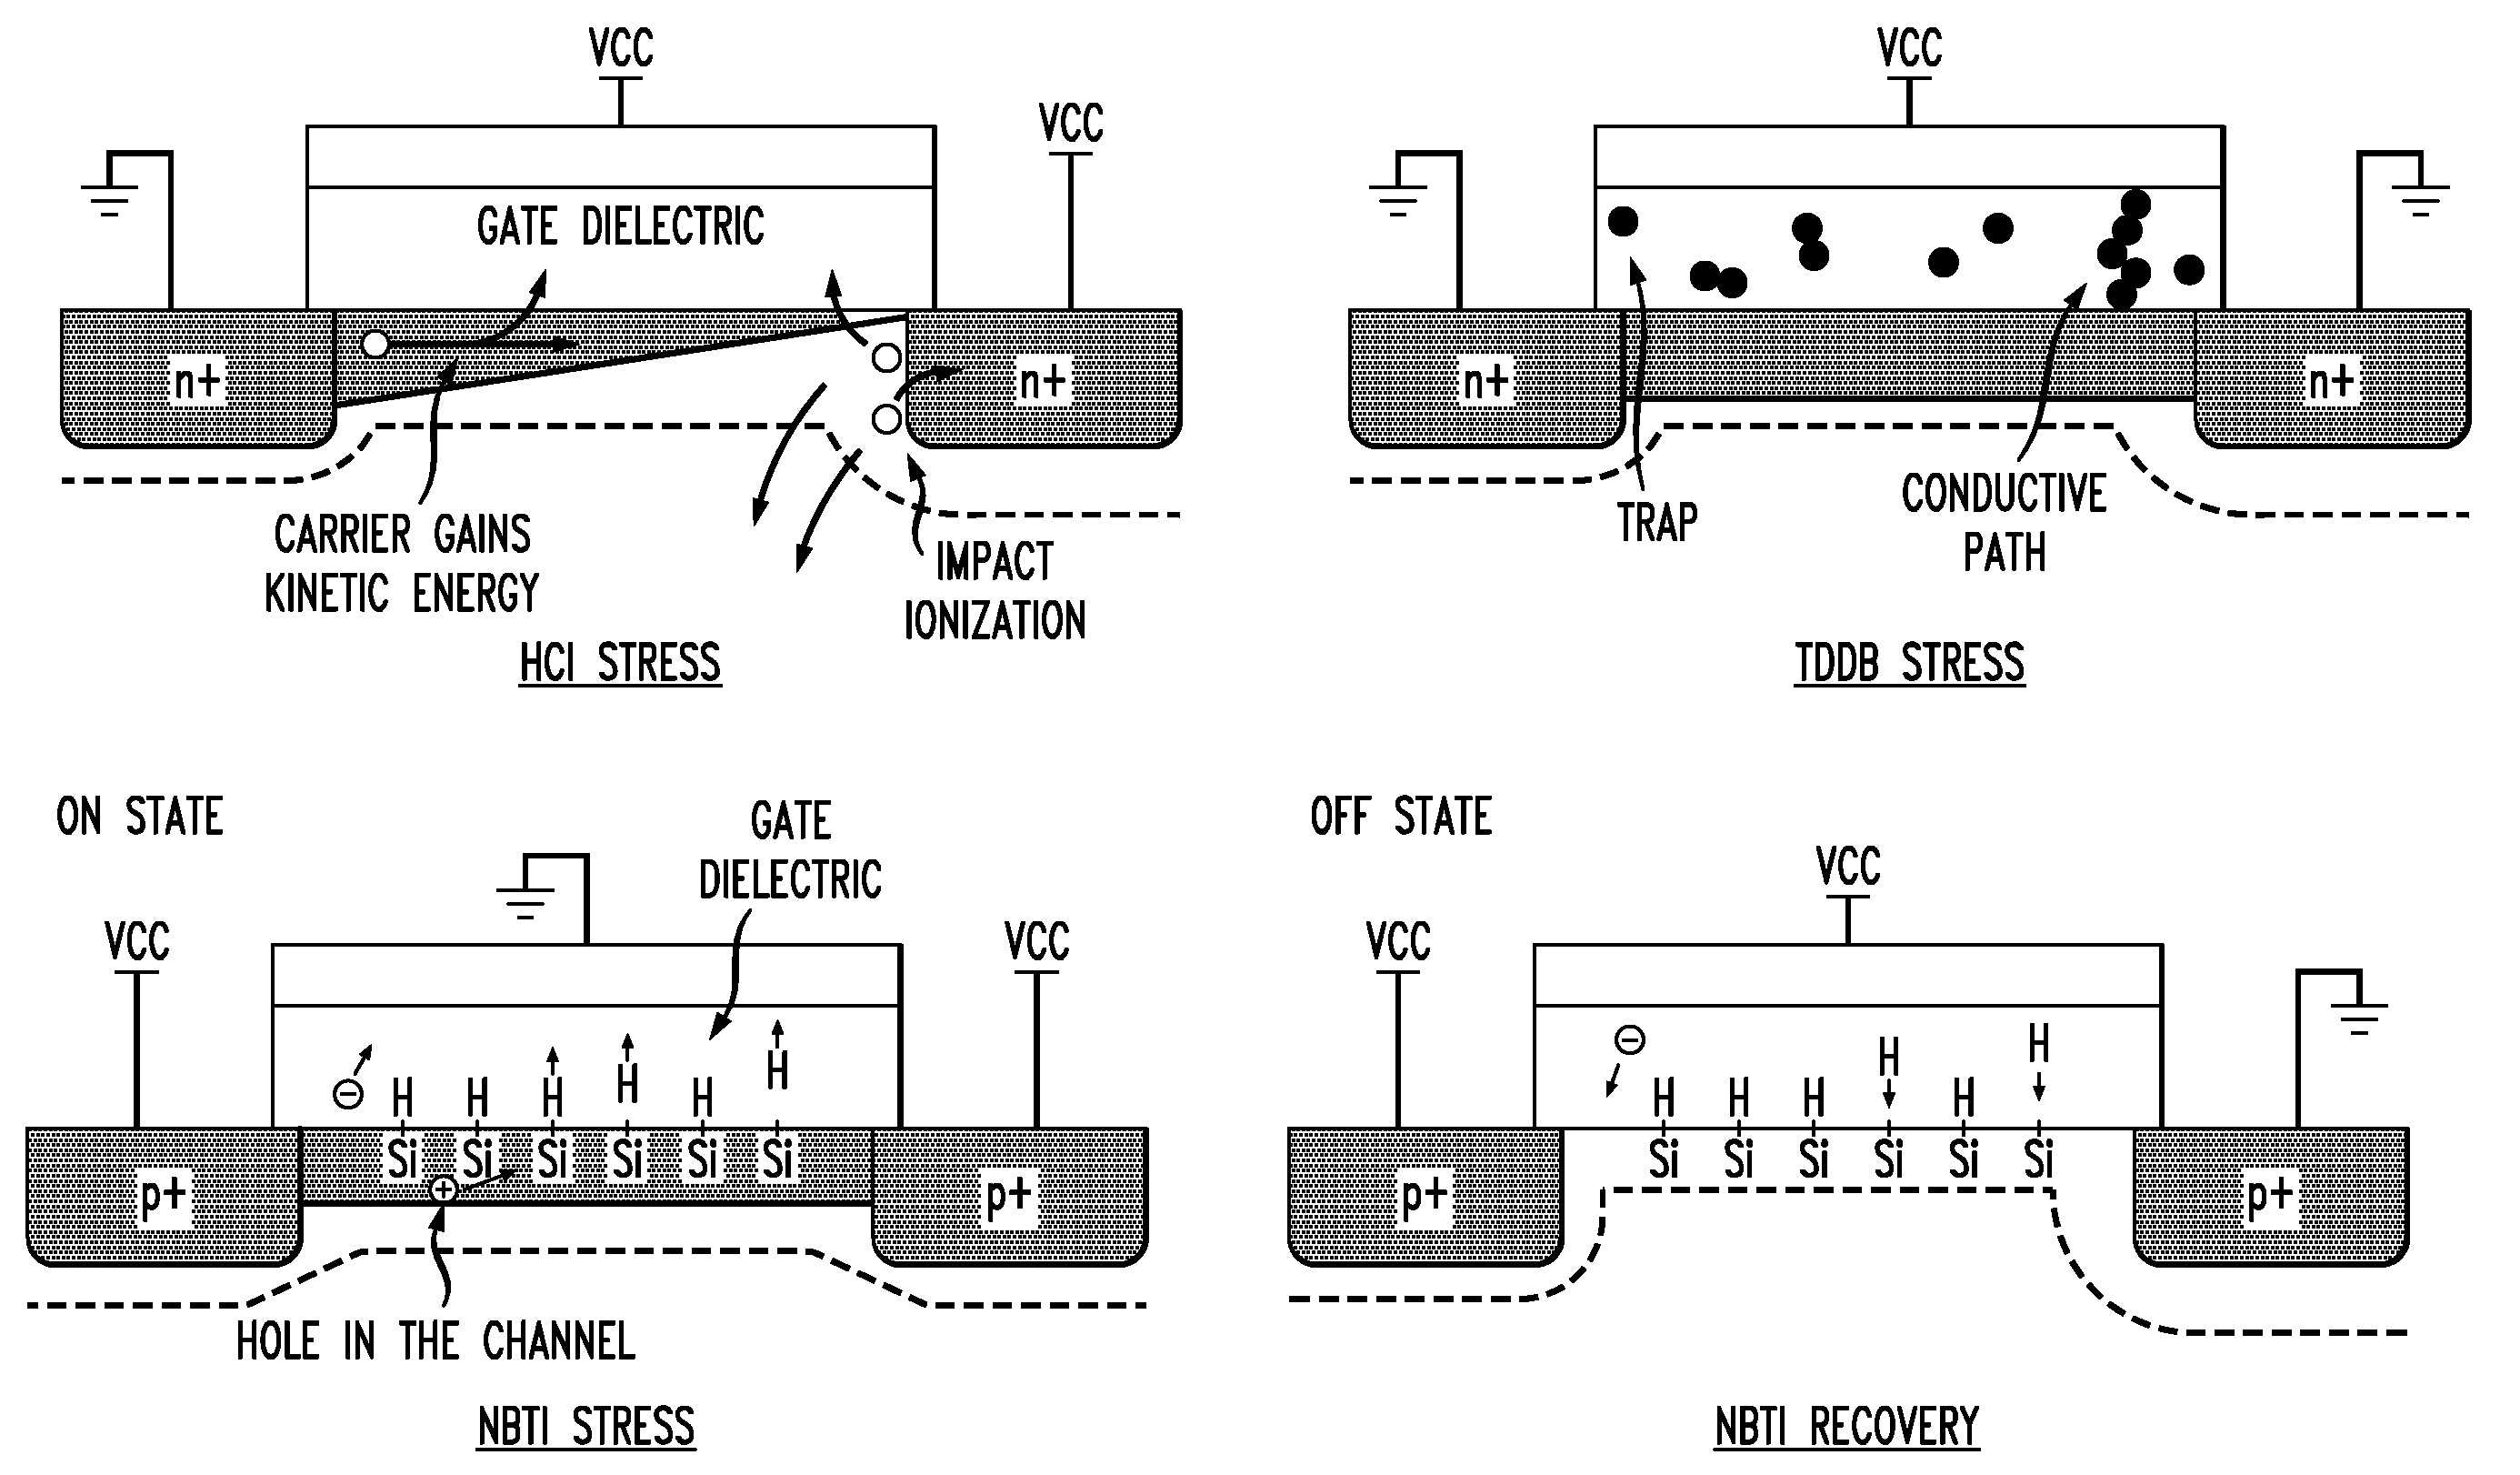 Apparatus and method for measuring degradation of CMOS VLSI elements